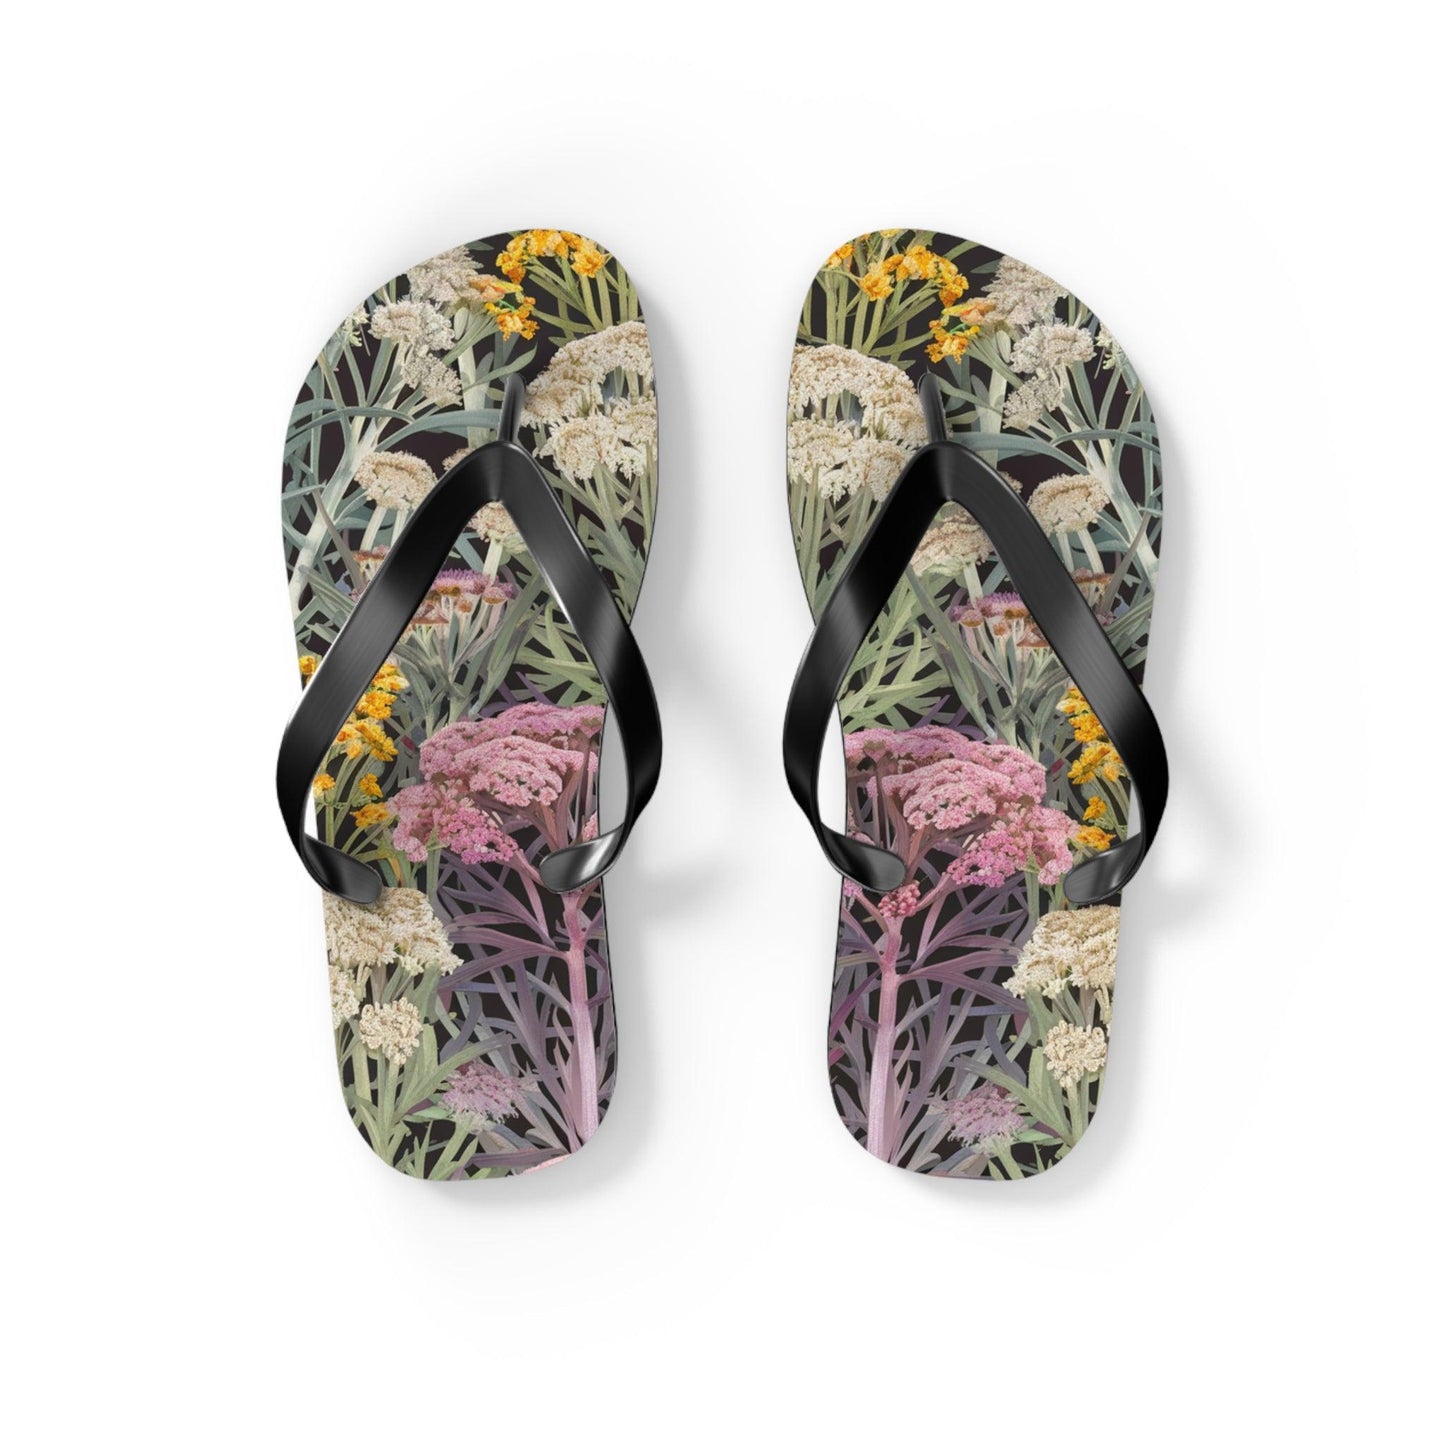 Yarrow Flower Inspired Flip Flops, Express Your Beach Loving Self - Coastal Collections